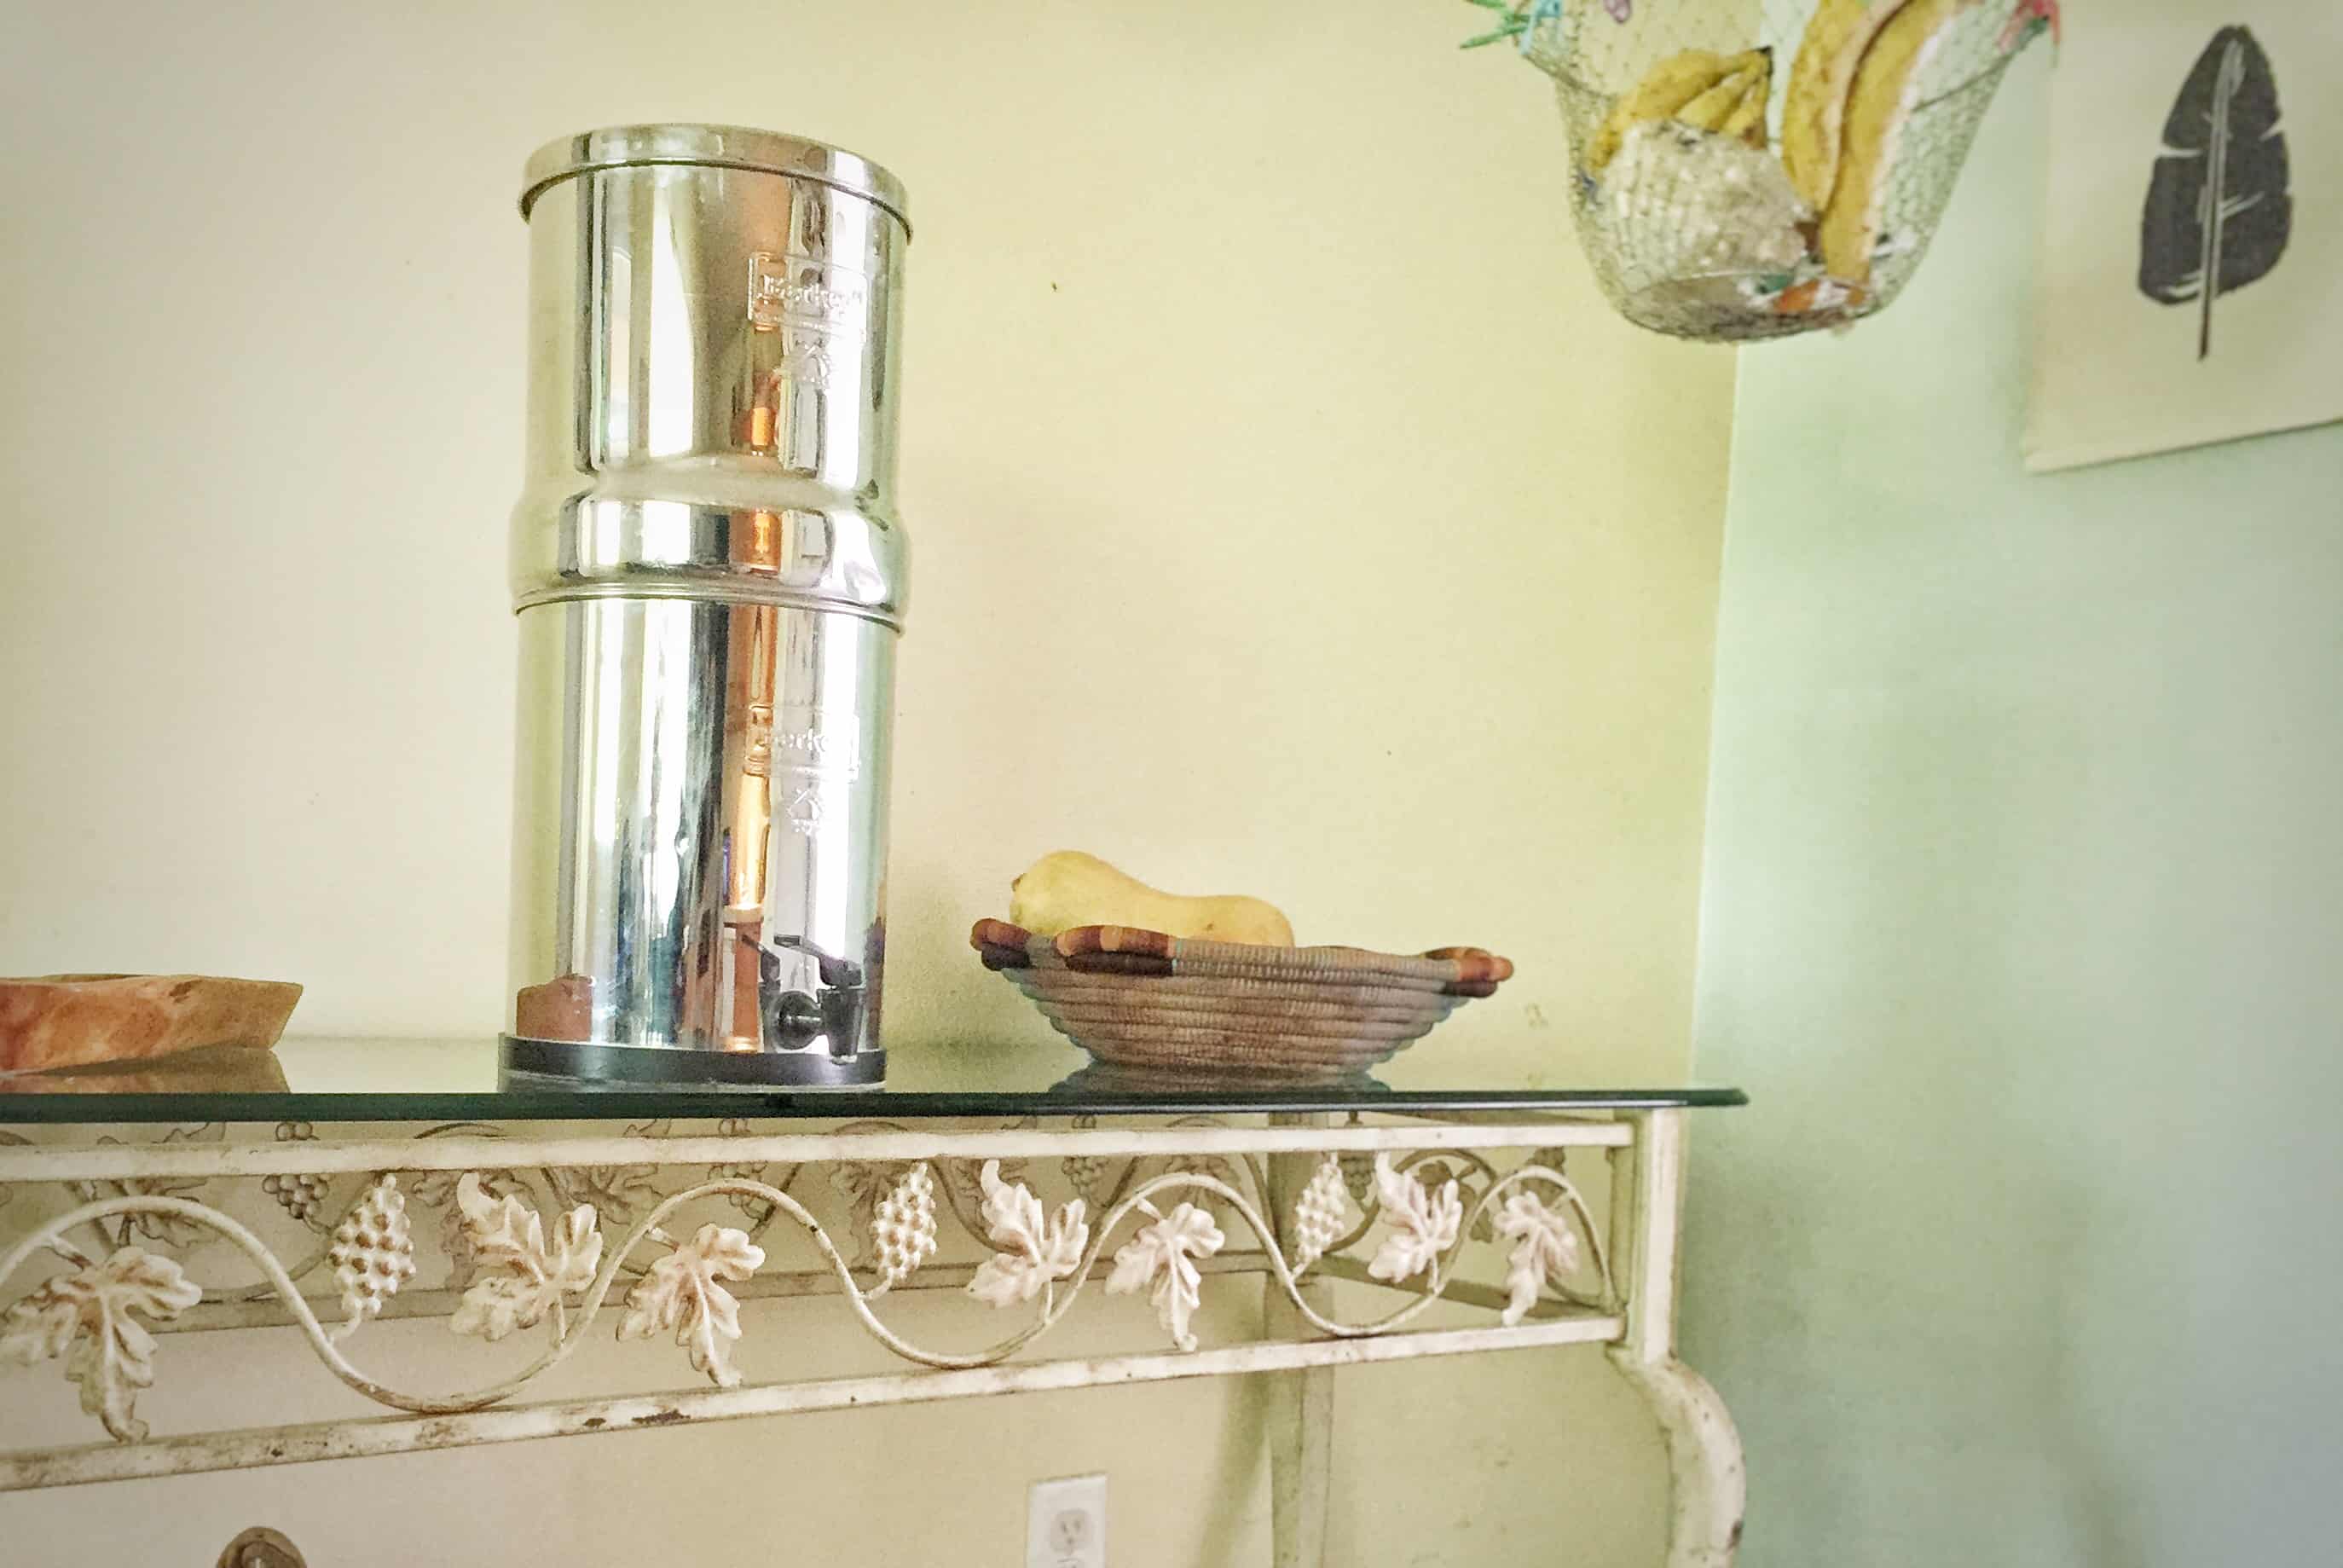 Big Berkey Water Filters for Healthy, Affordable Water at Home